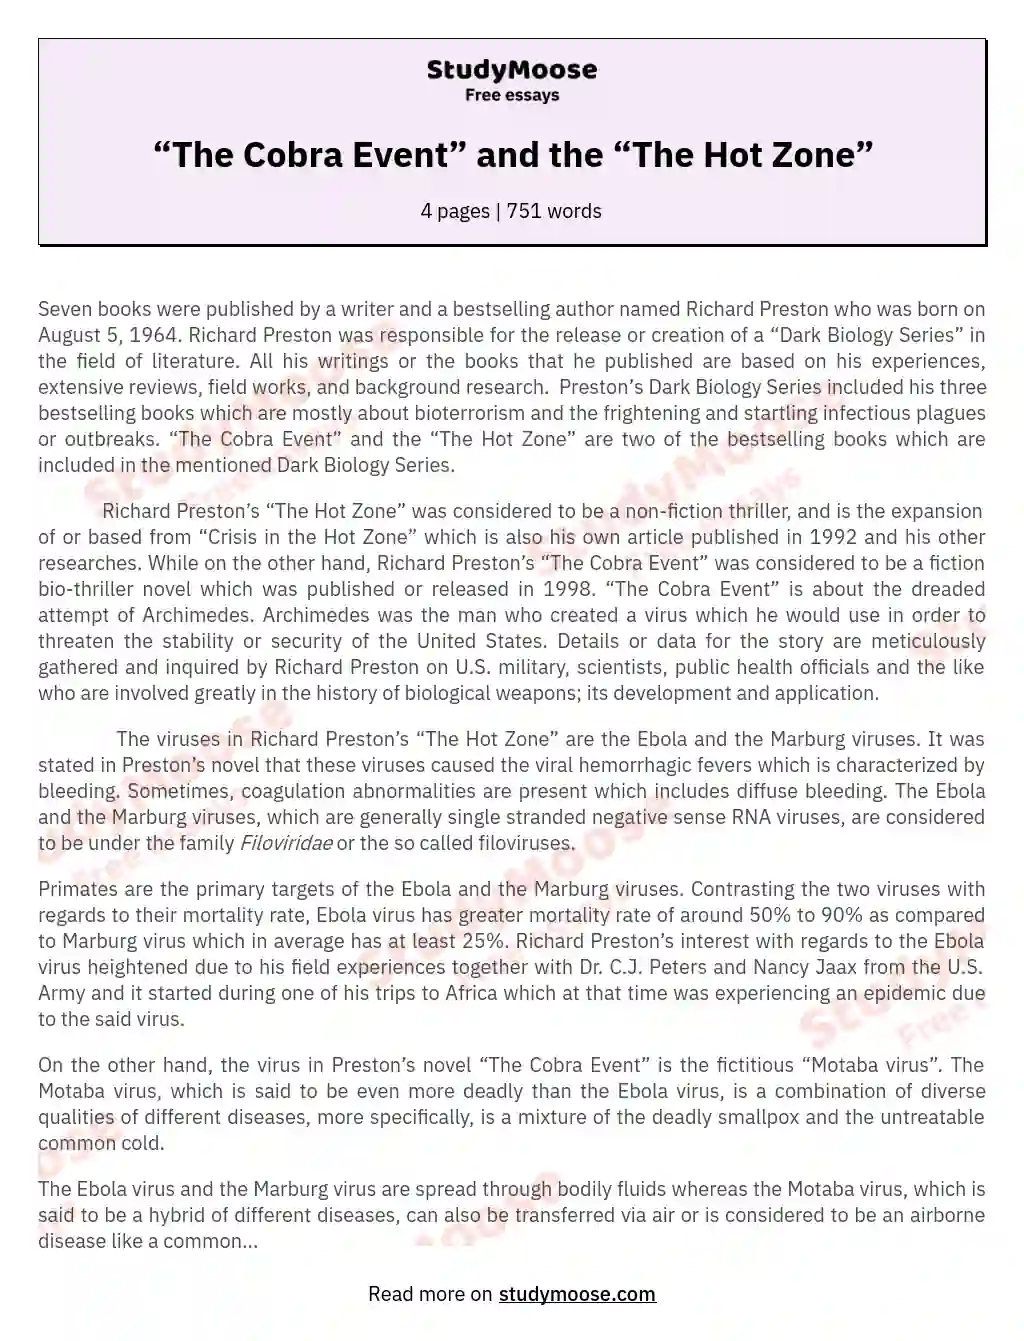 “The Cobra Event” and the “The Hot Zone”